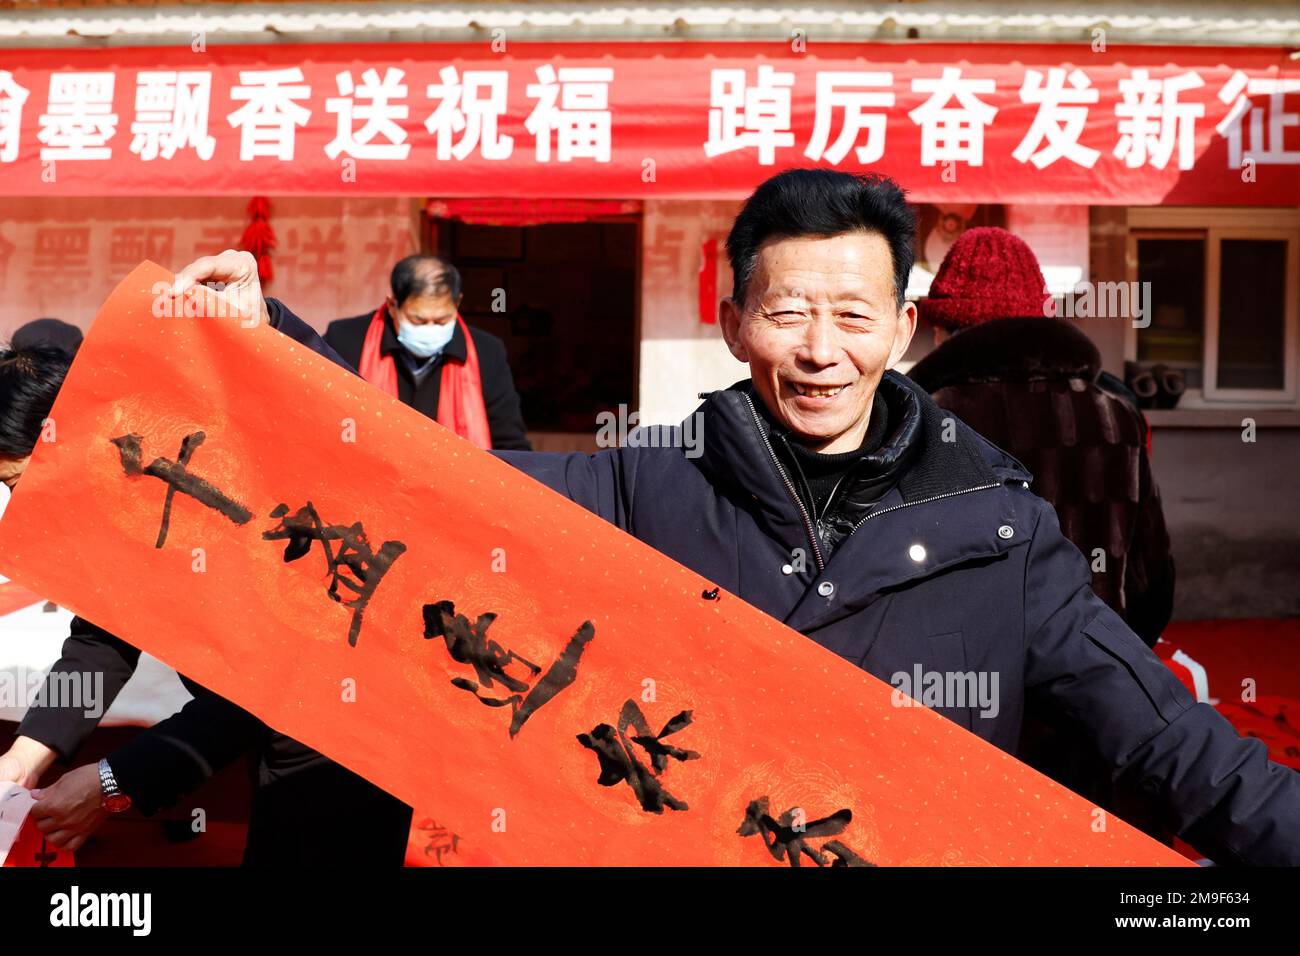 SUQIAN, CHINA - JANUARY 18, 2023 - Calligraphers wrote couplets to citizens to celebrate the lunar Year of the Rabbit. January 18, 2023, Suqian City, Stock Photo